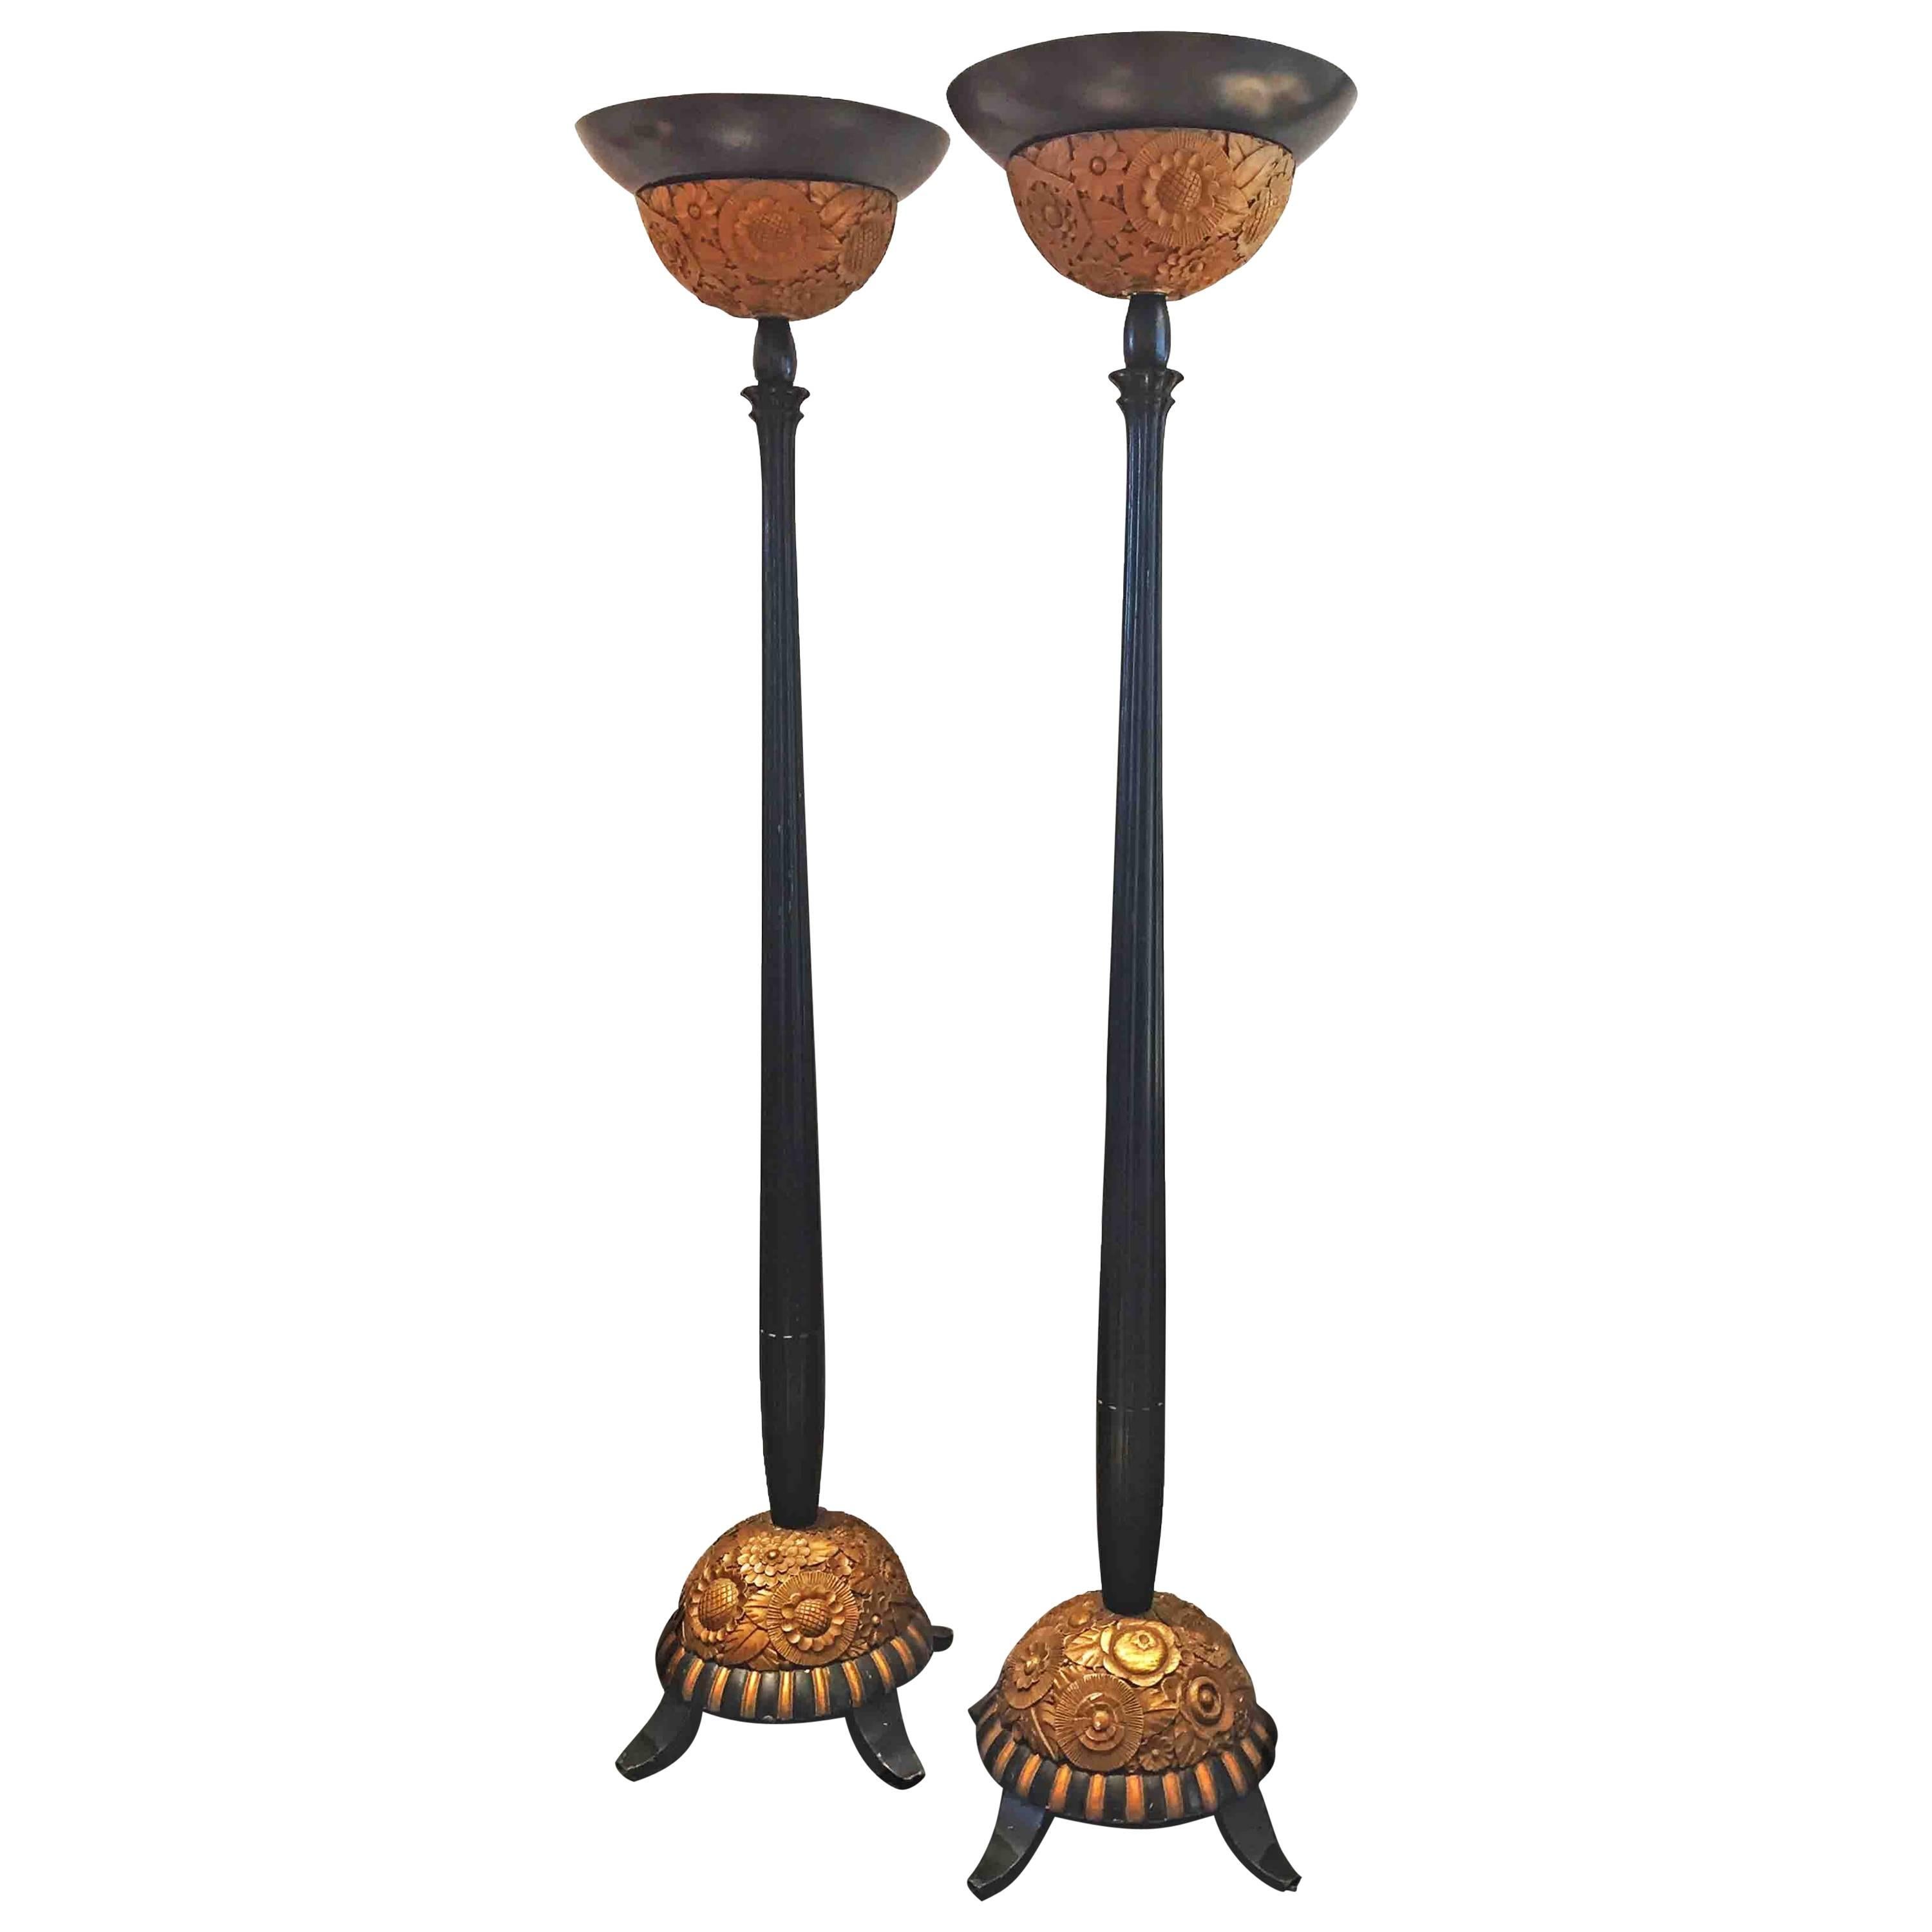 Pair of Black and Gold Art Deco Floor Lamps, Featuring Carved Decorative Bases For Sale